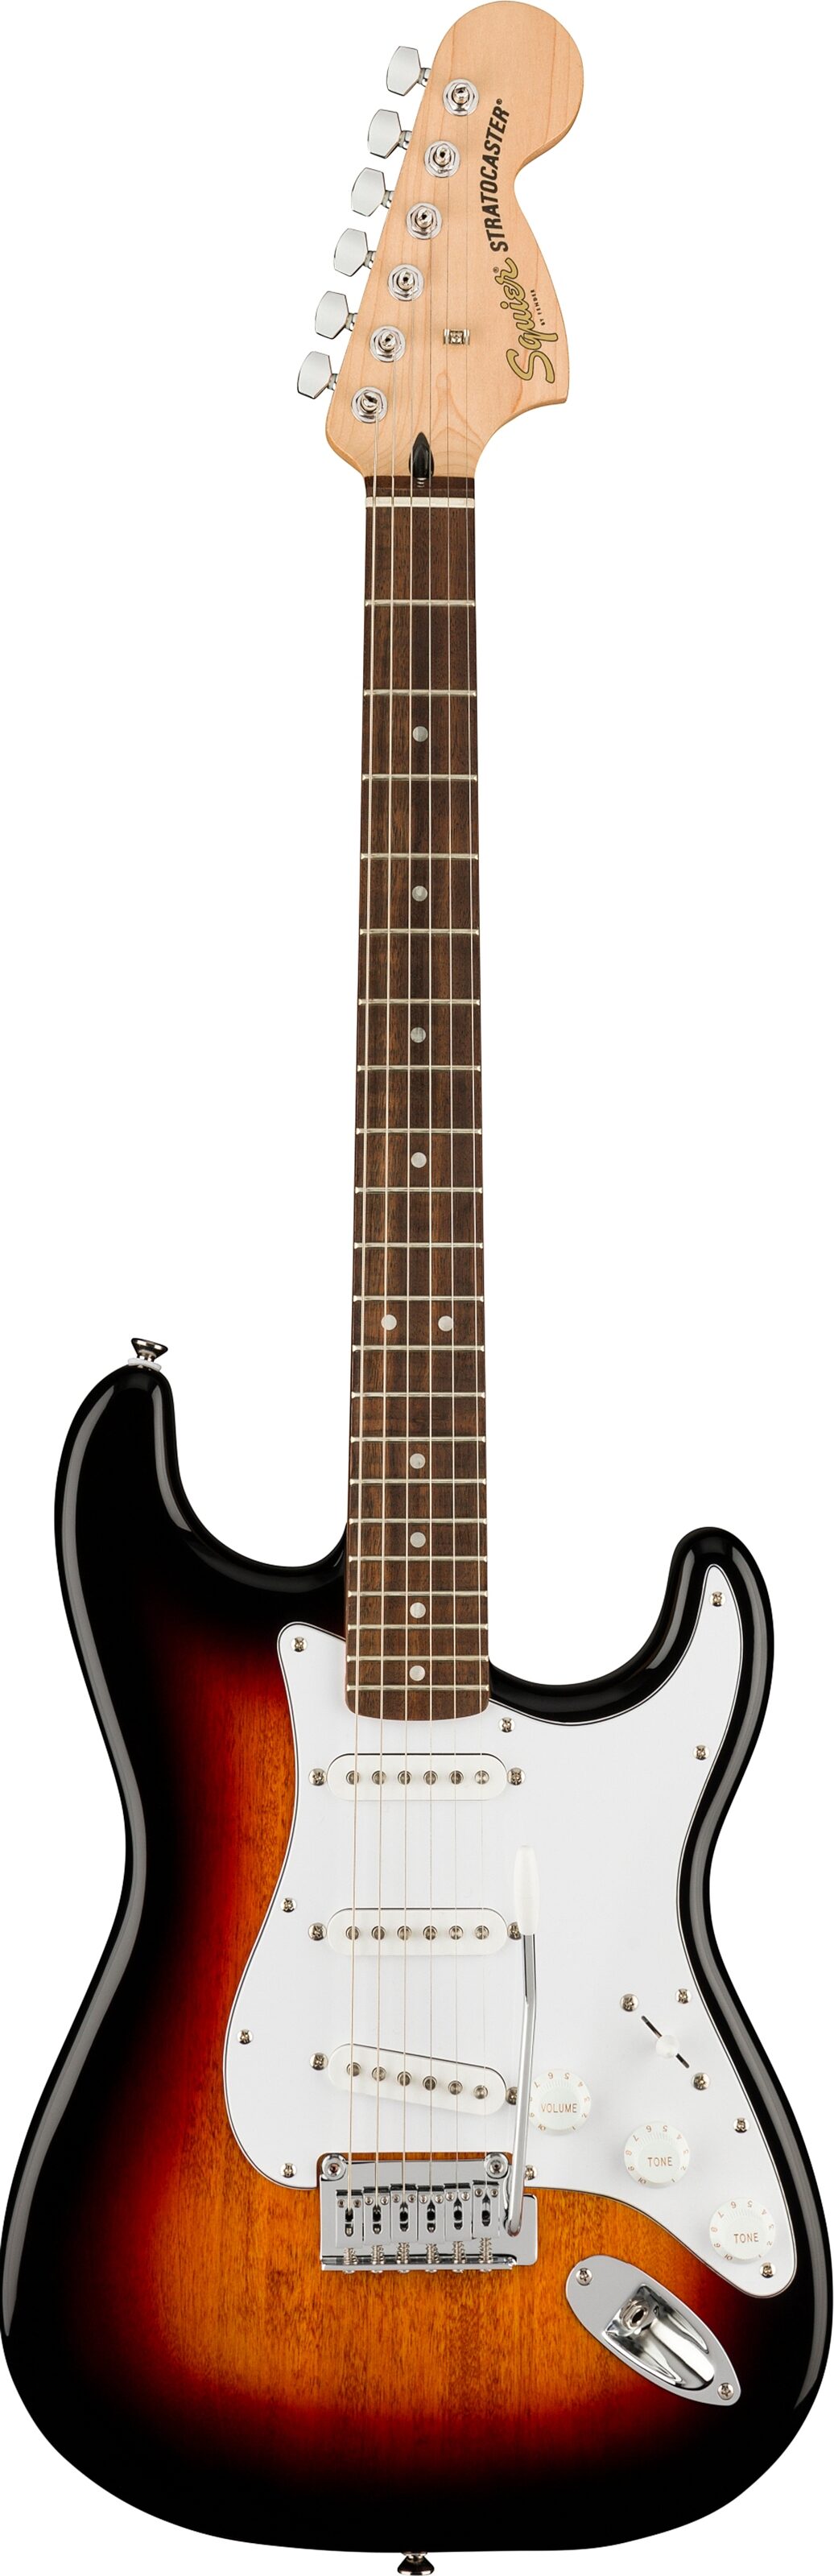 Squier Affinity Stratocaster Electric Guitar, with Laurel Fingerboard